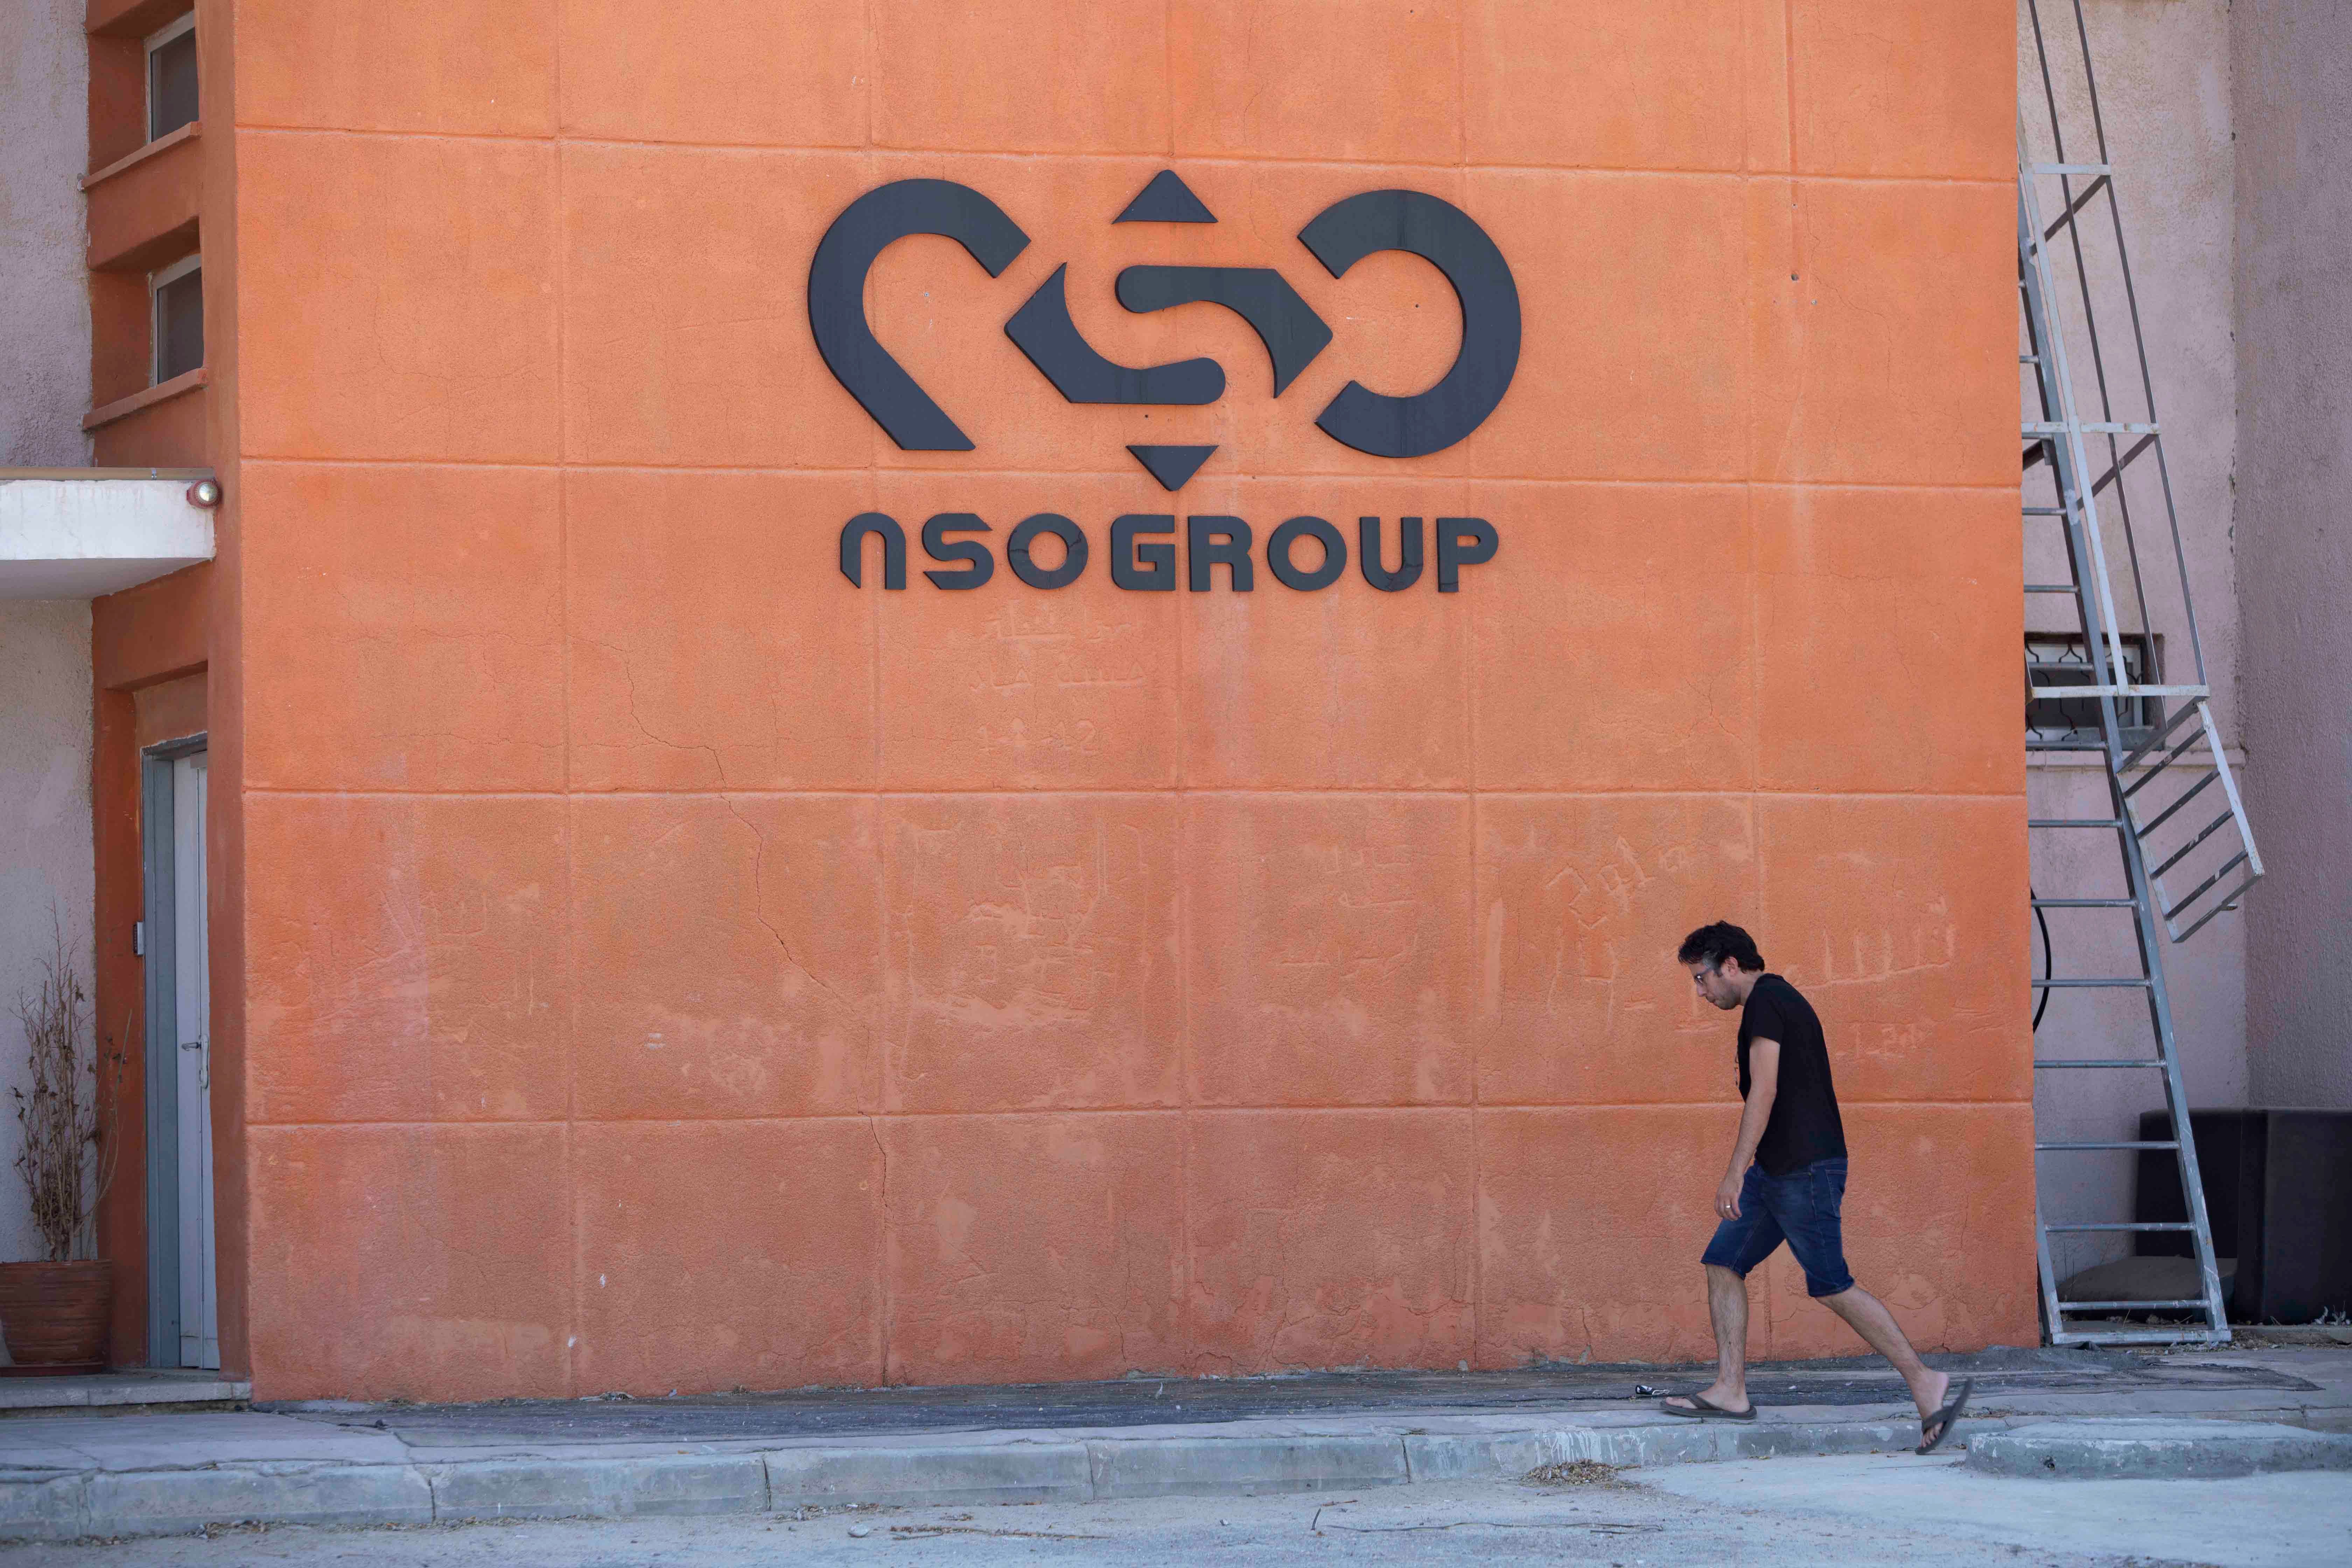 NSO Group logo on building